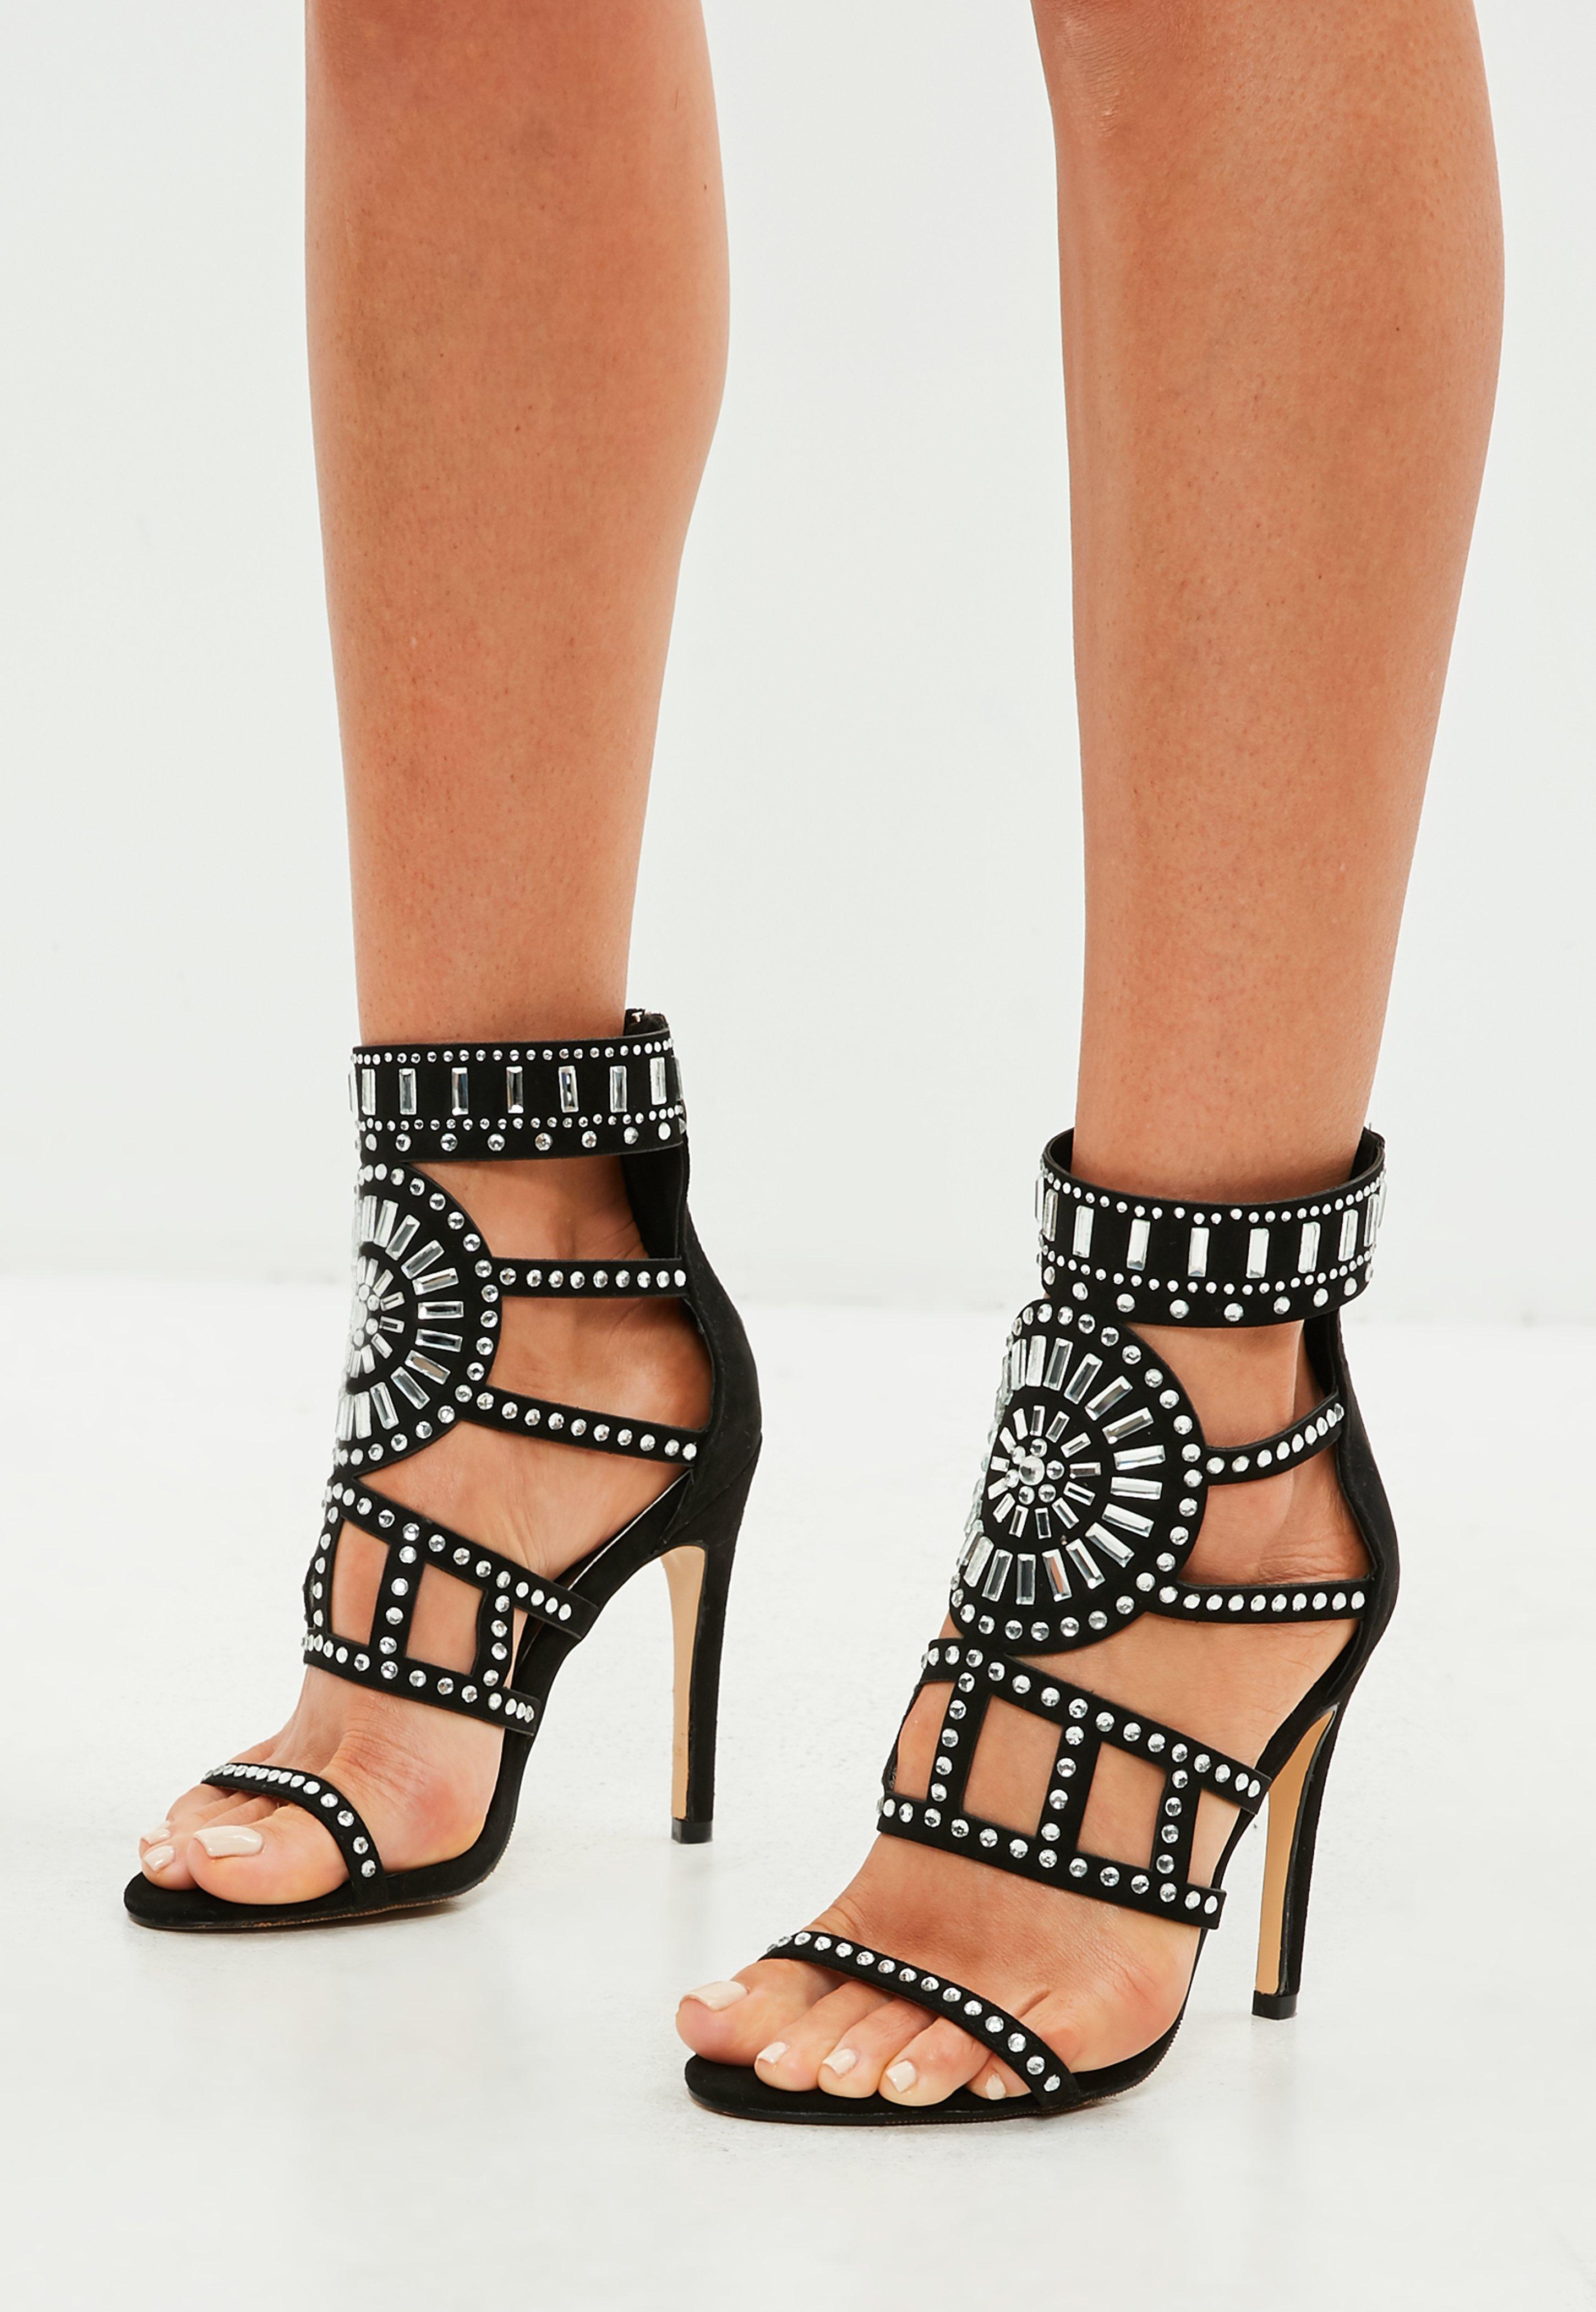 Sexy gladiator sandals are only $89.99 - High heels daily